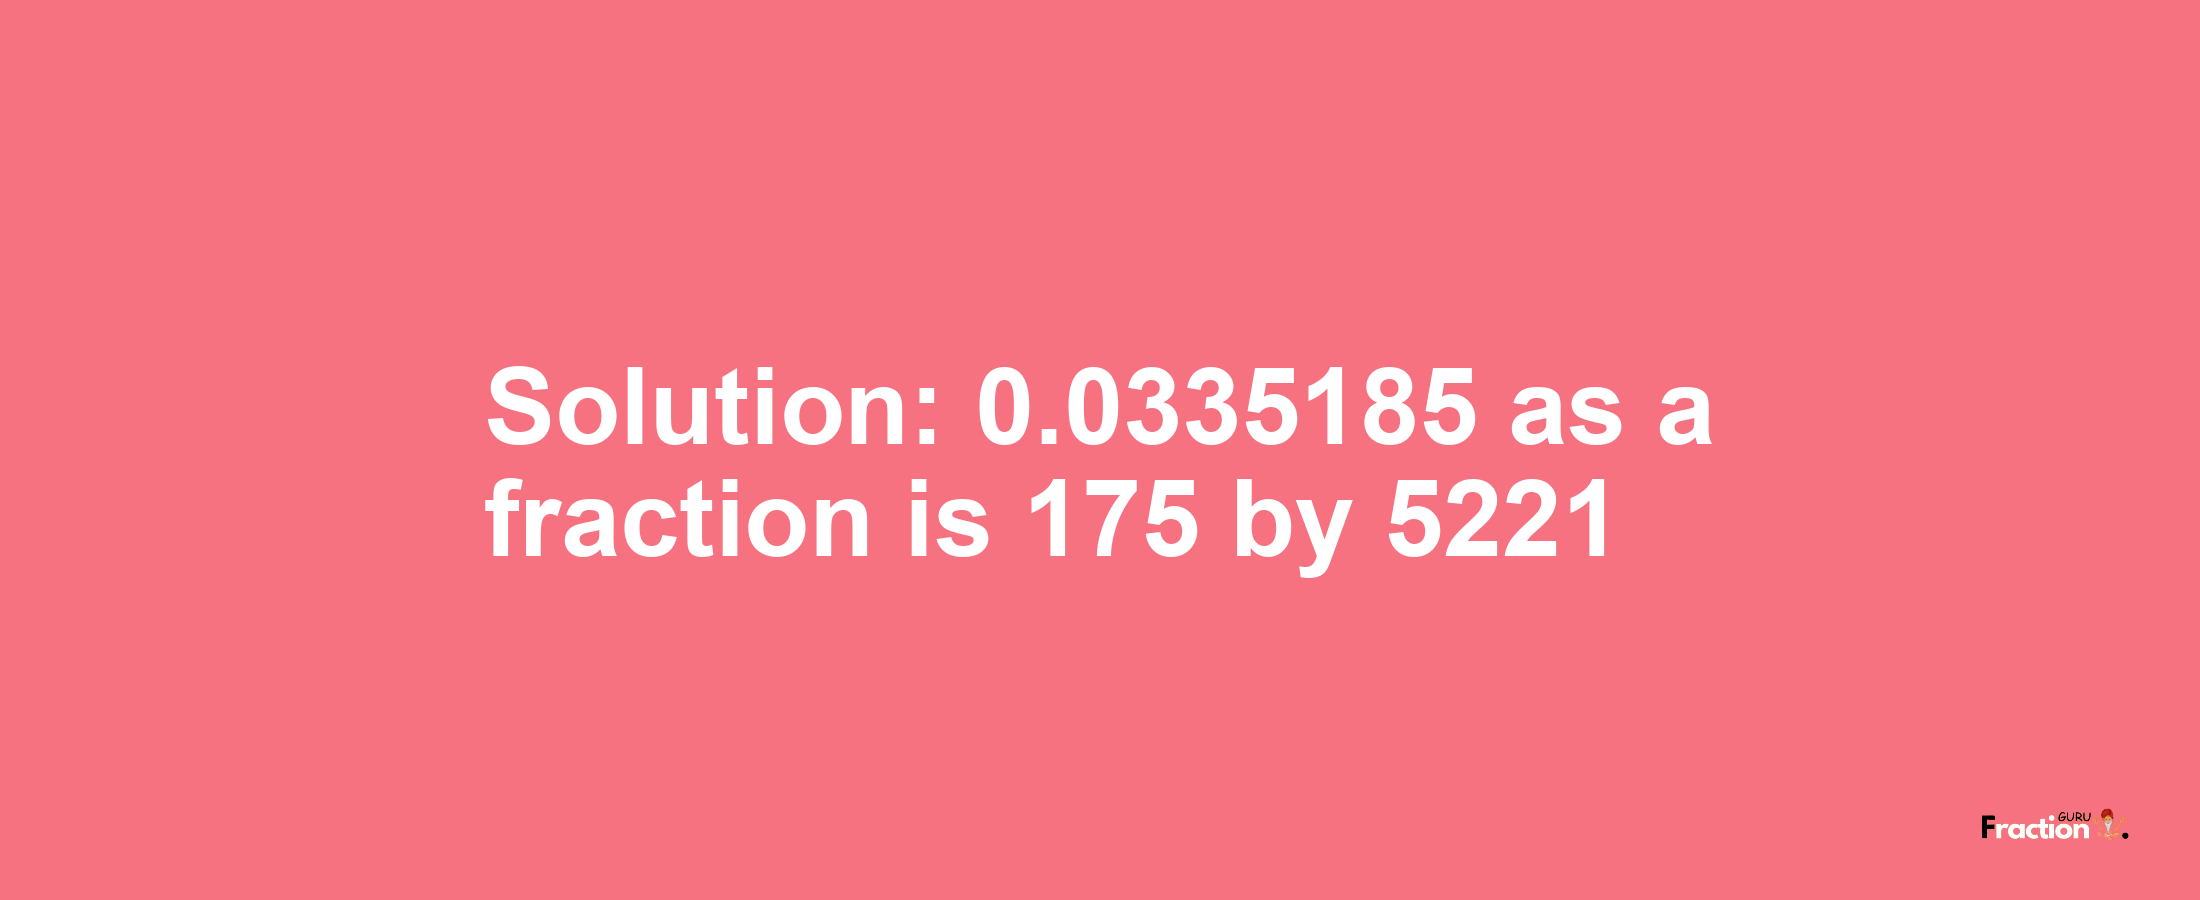 Solution:0.0335185 as a fraction is 175/5221